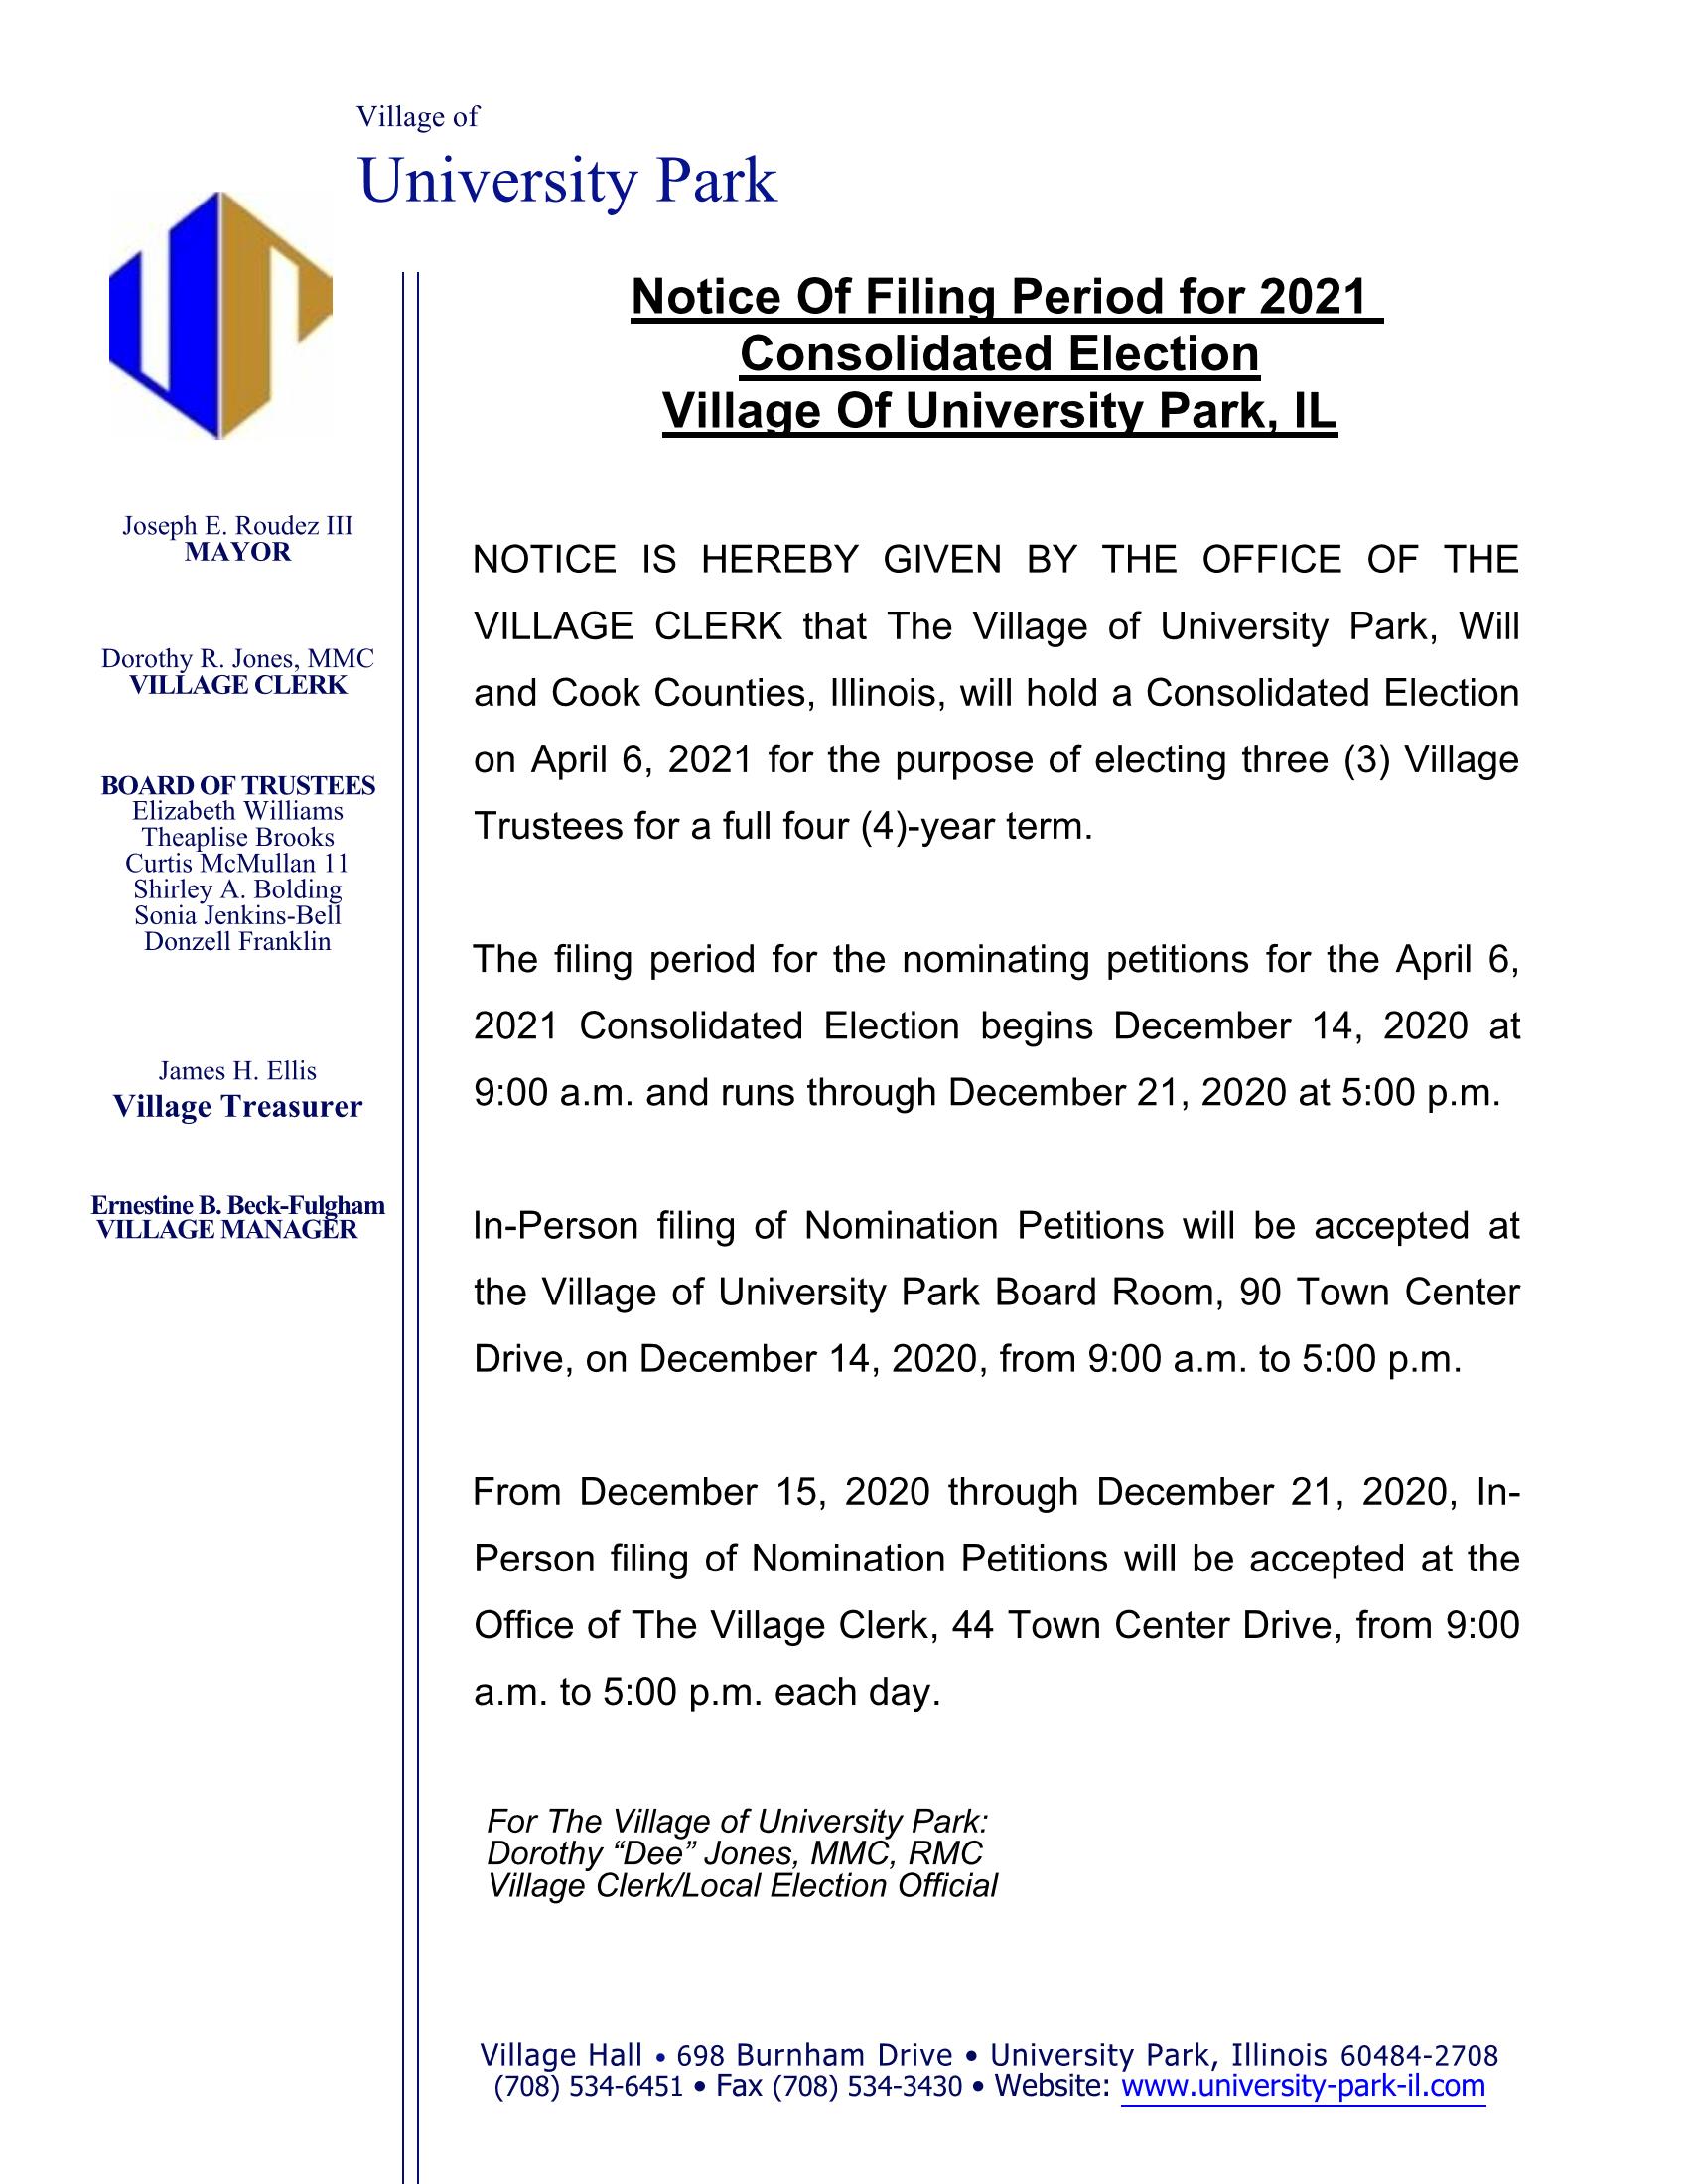 2020 Filing Notice 2021 Election - final_Page_1